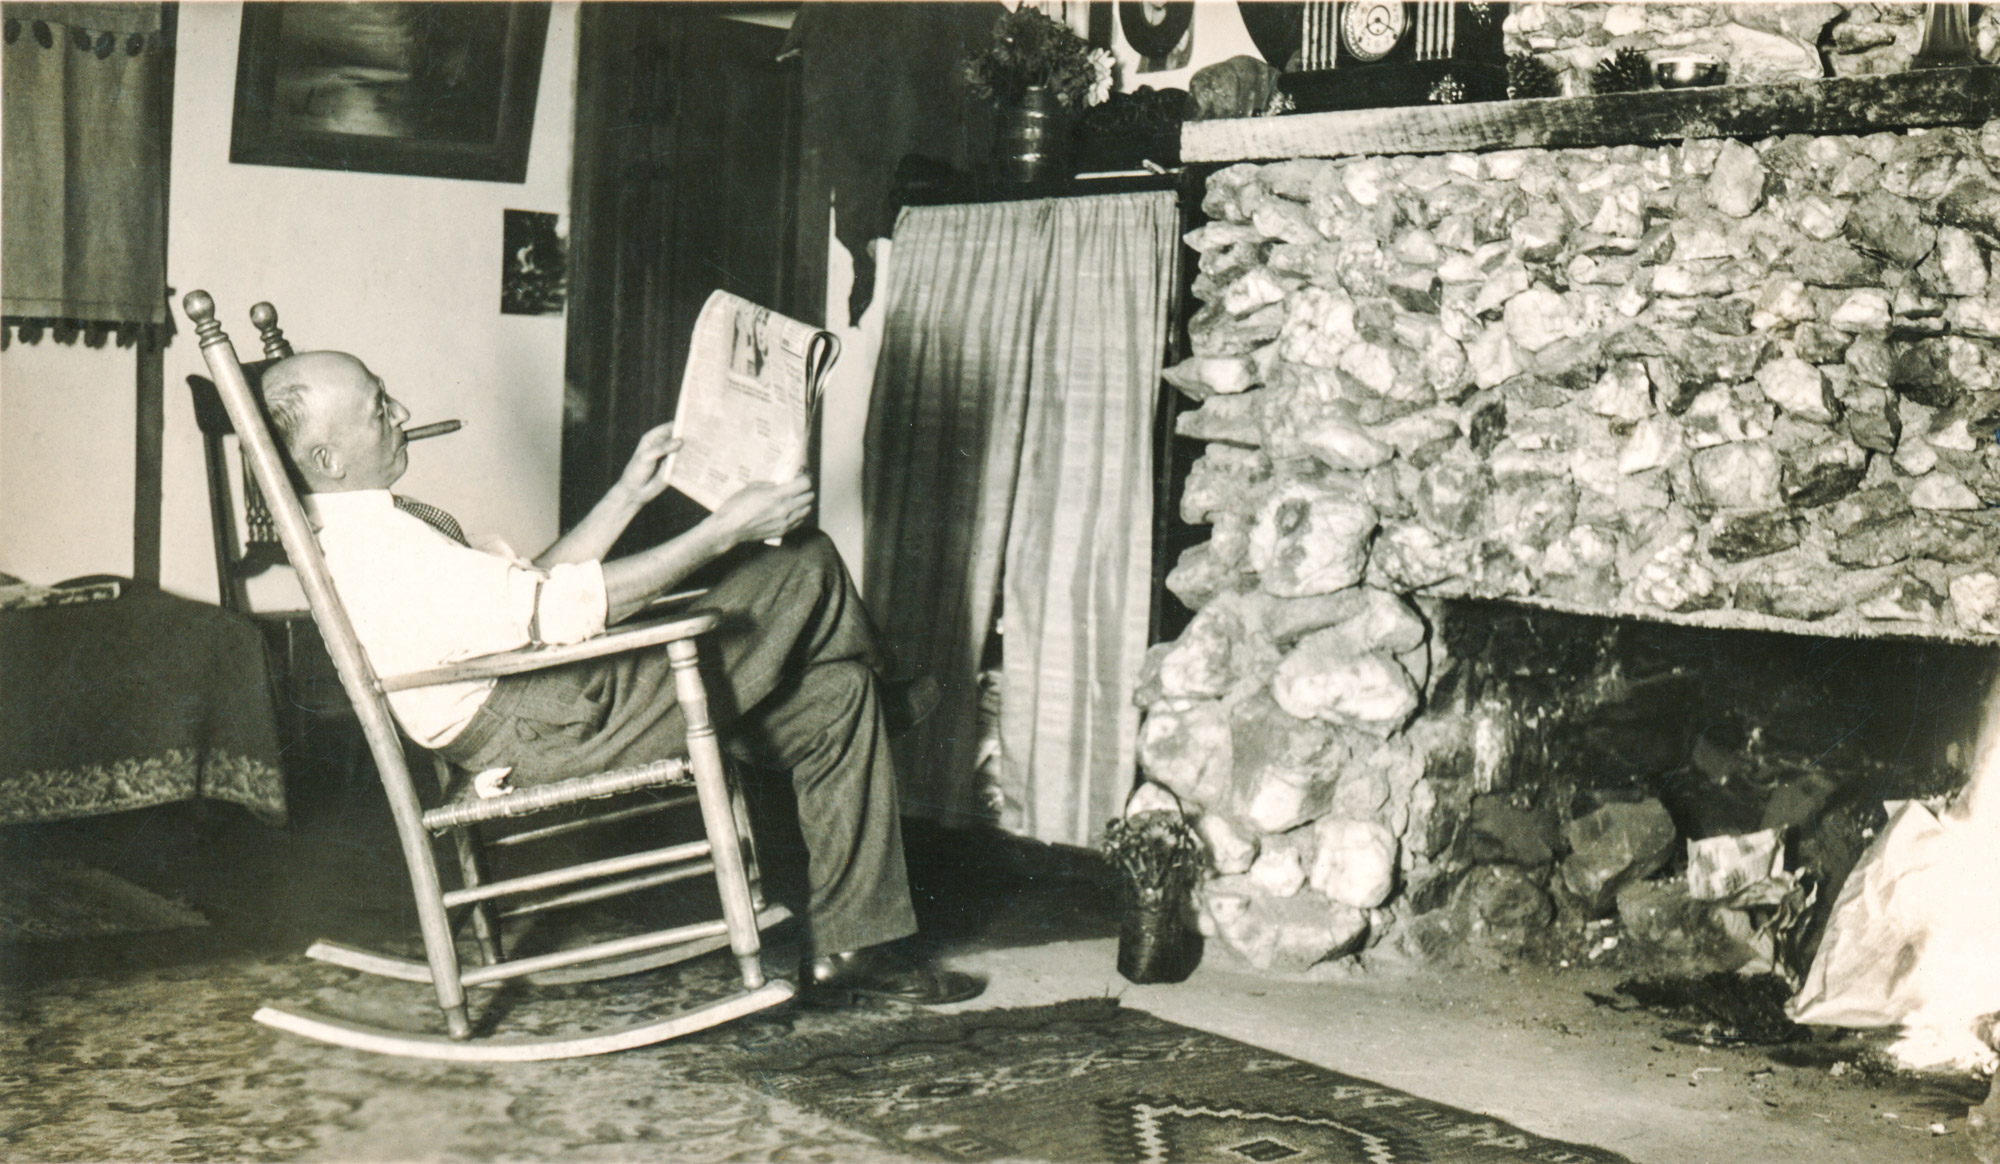 Dauth Family Archive - George Dauth Sitting By Idlewild Lodge Hearth